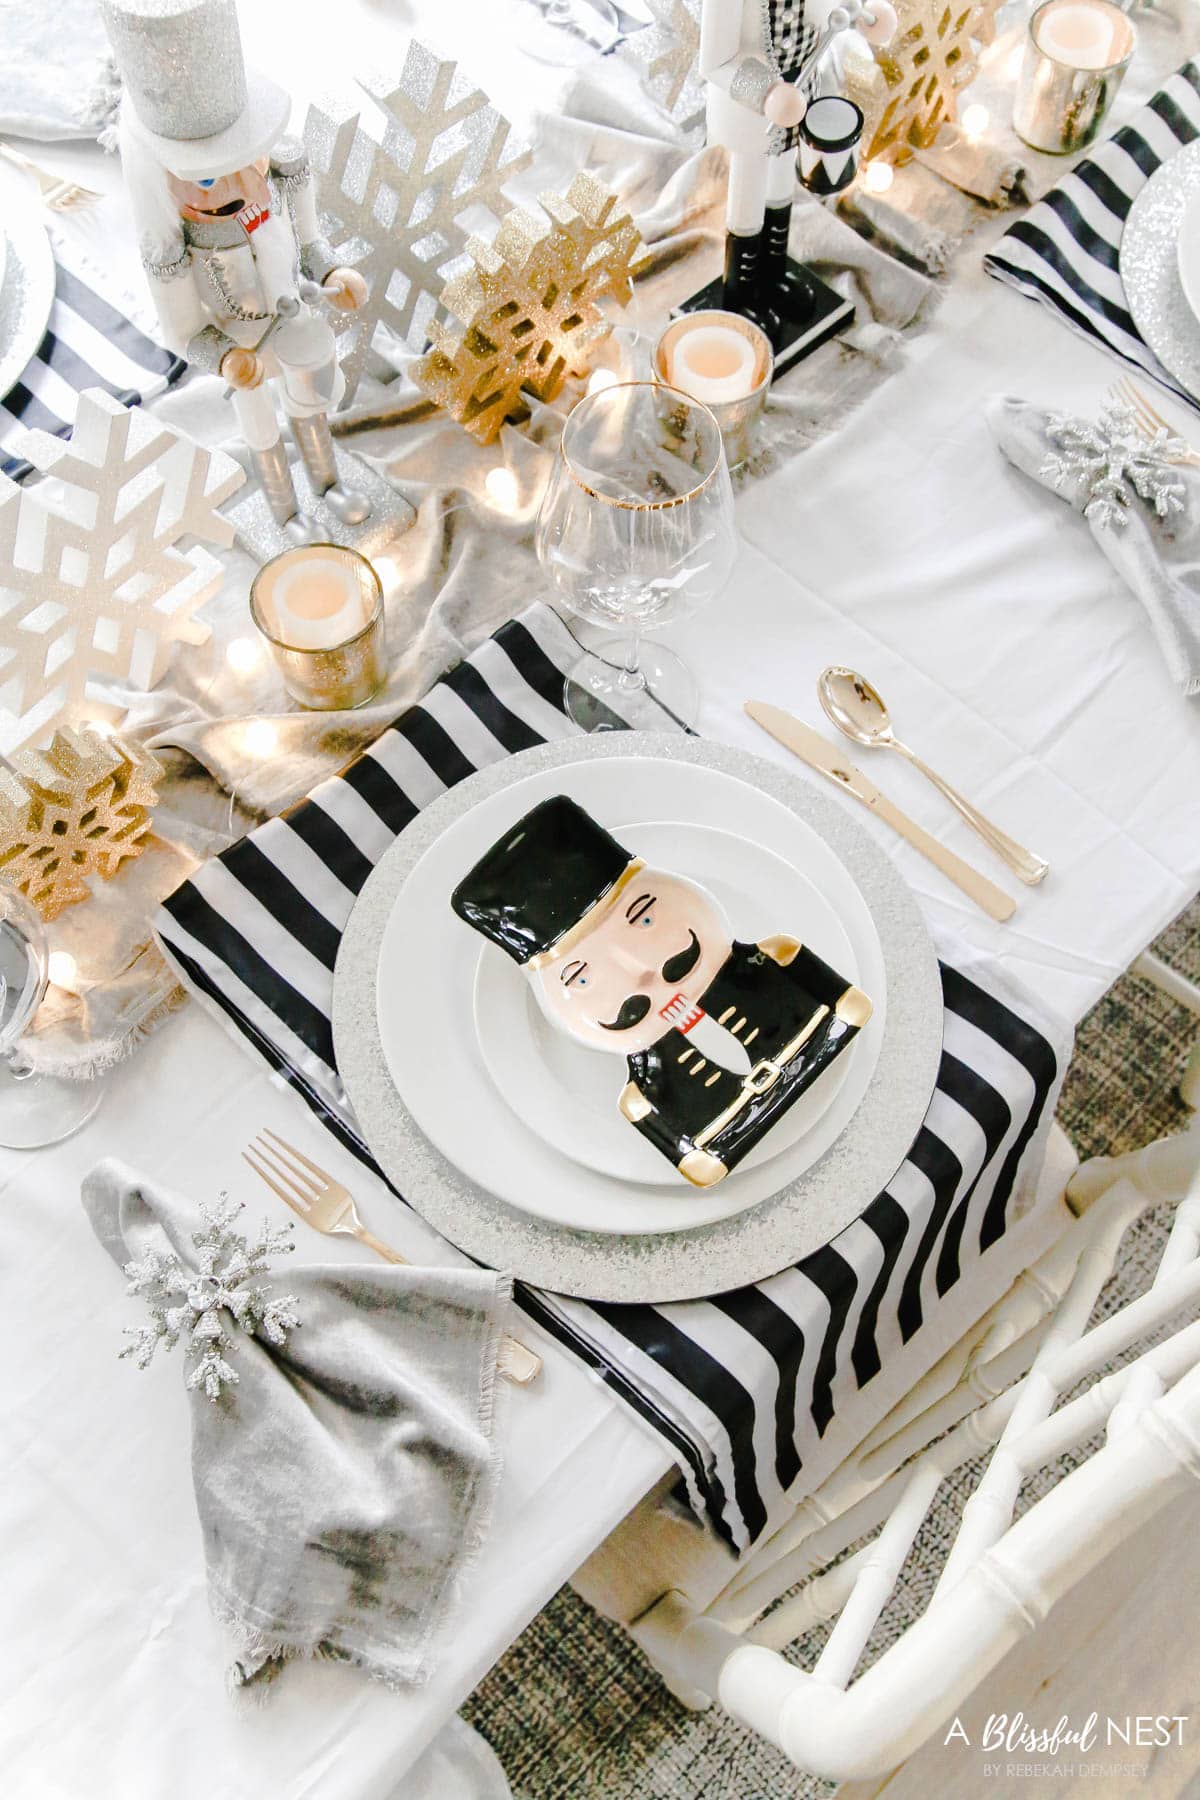 gold glitter snowflakes and gold votives in the center of the table with black and white fabric runner